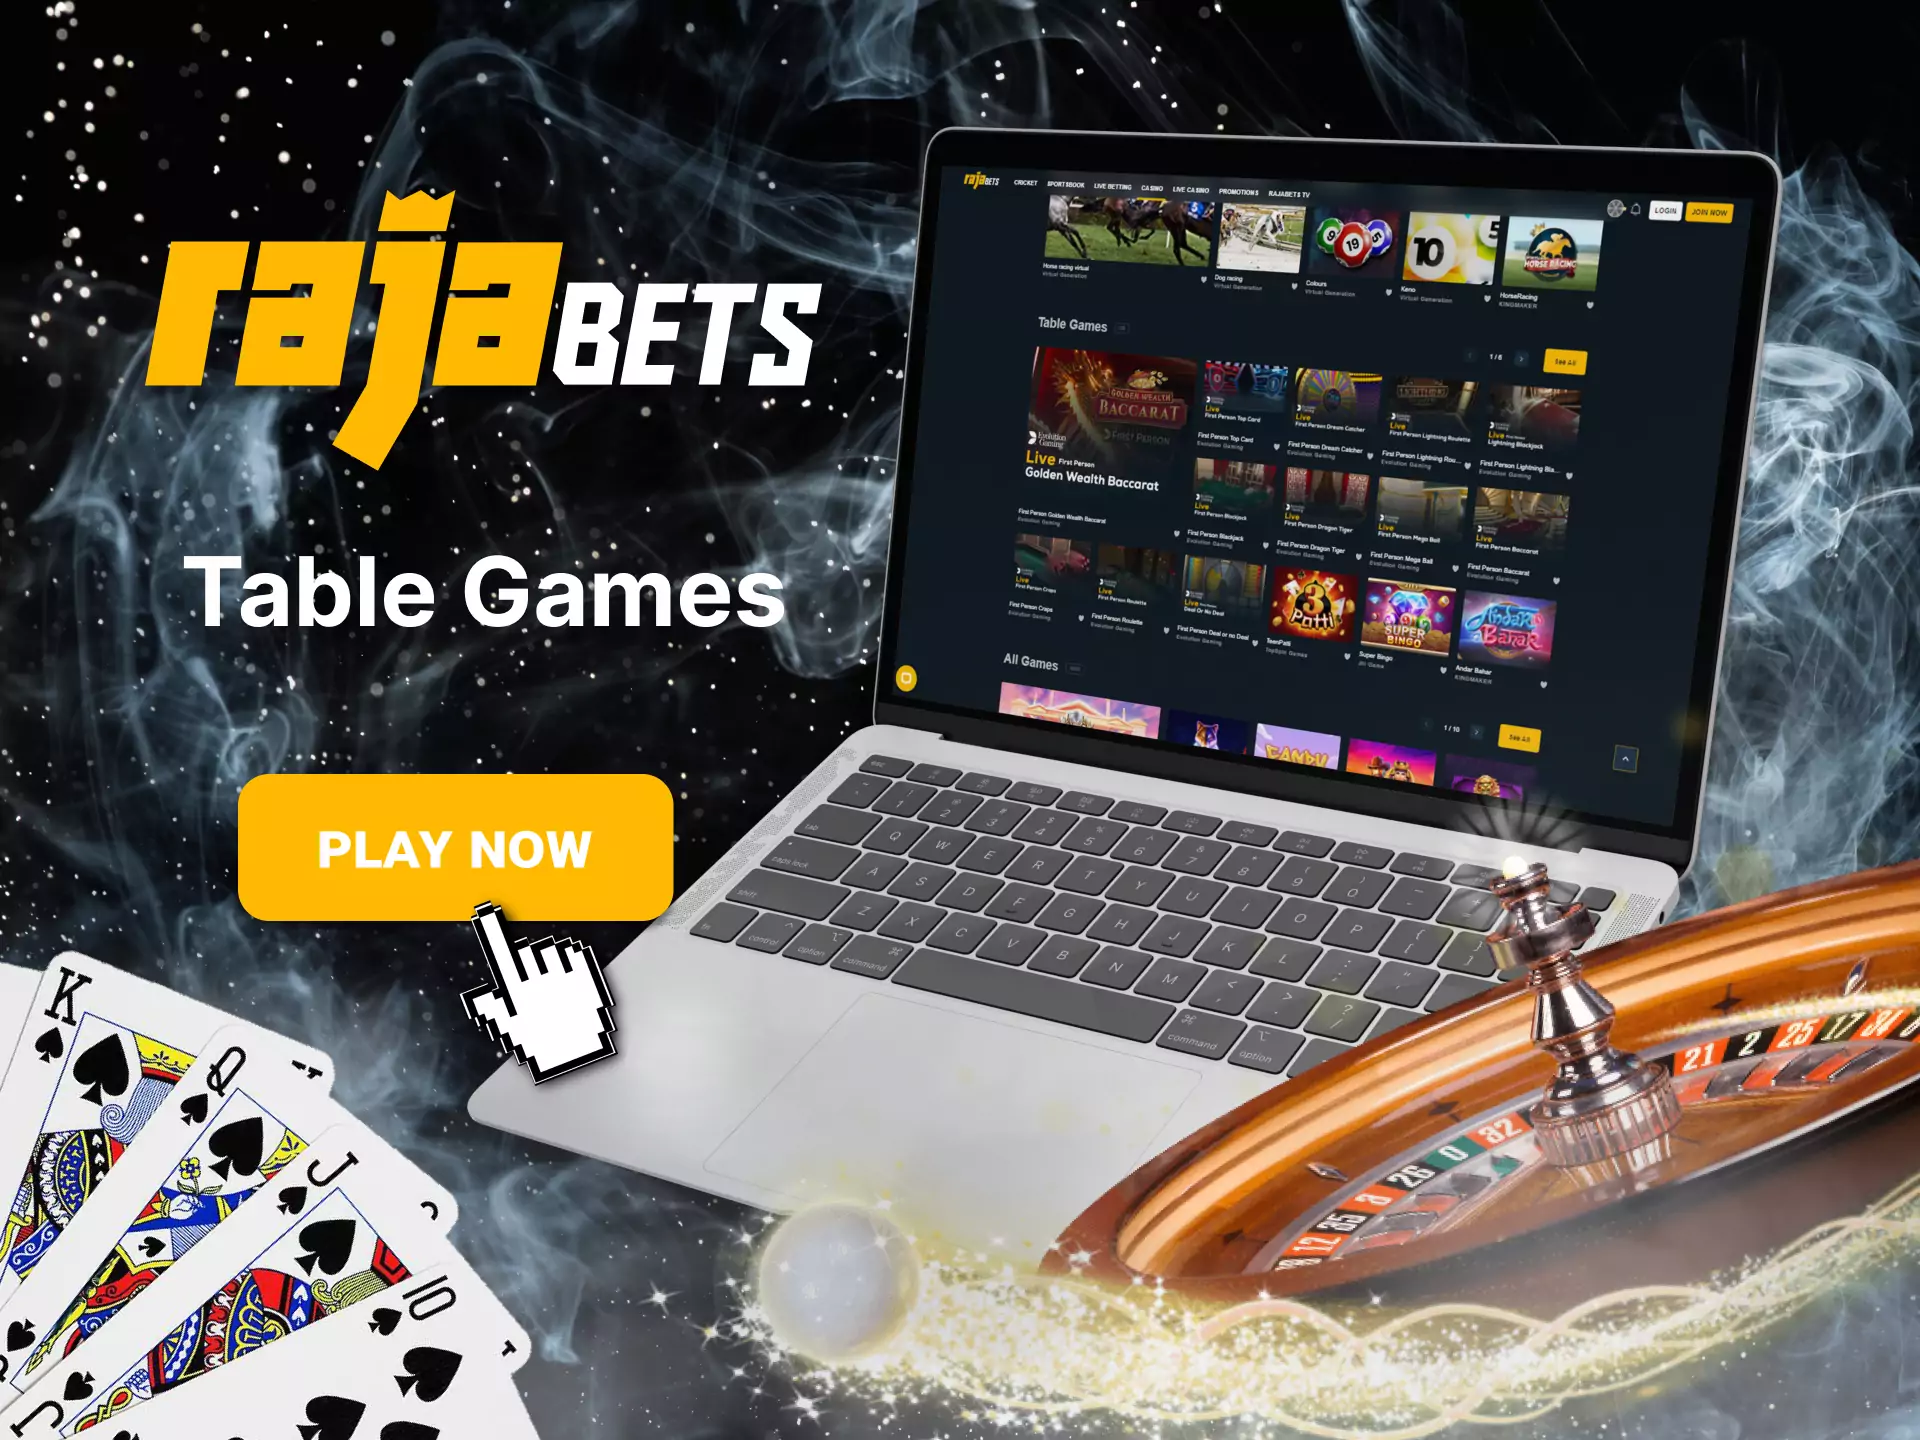 Try different table games in Rajabets.